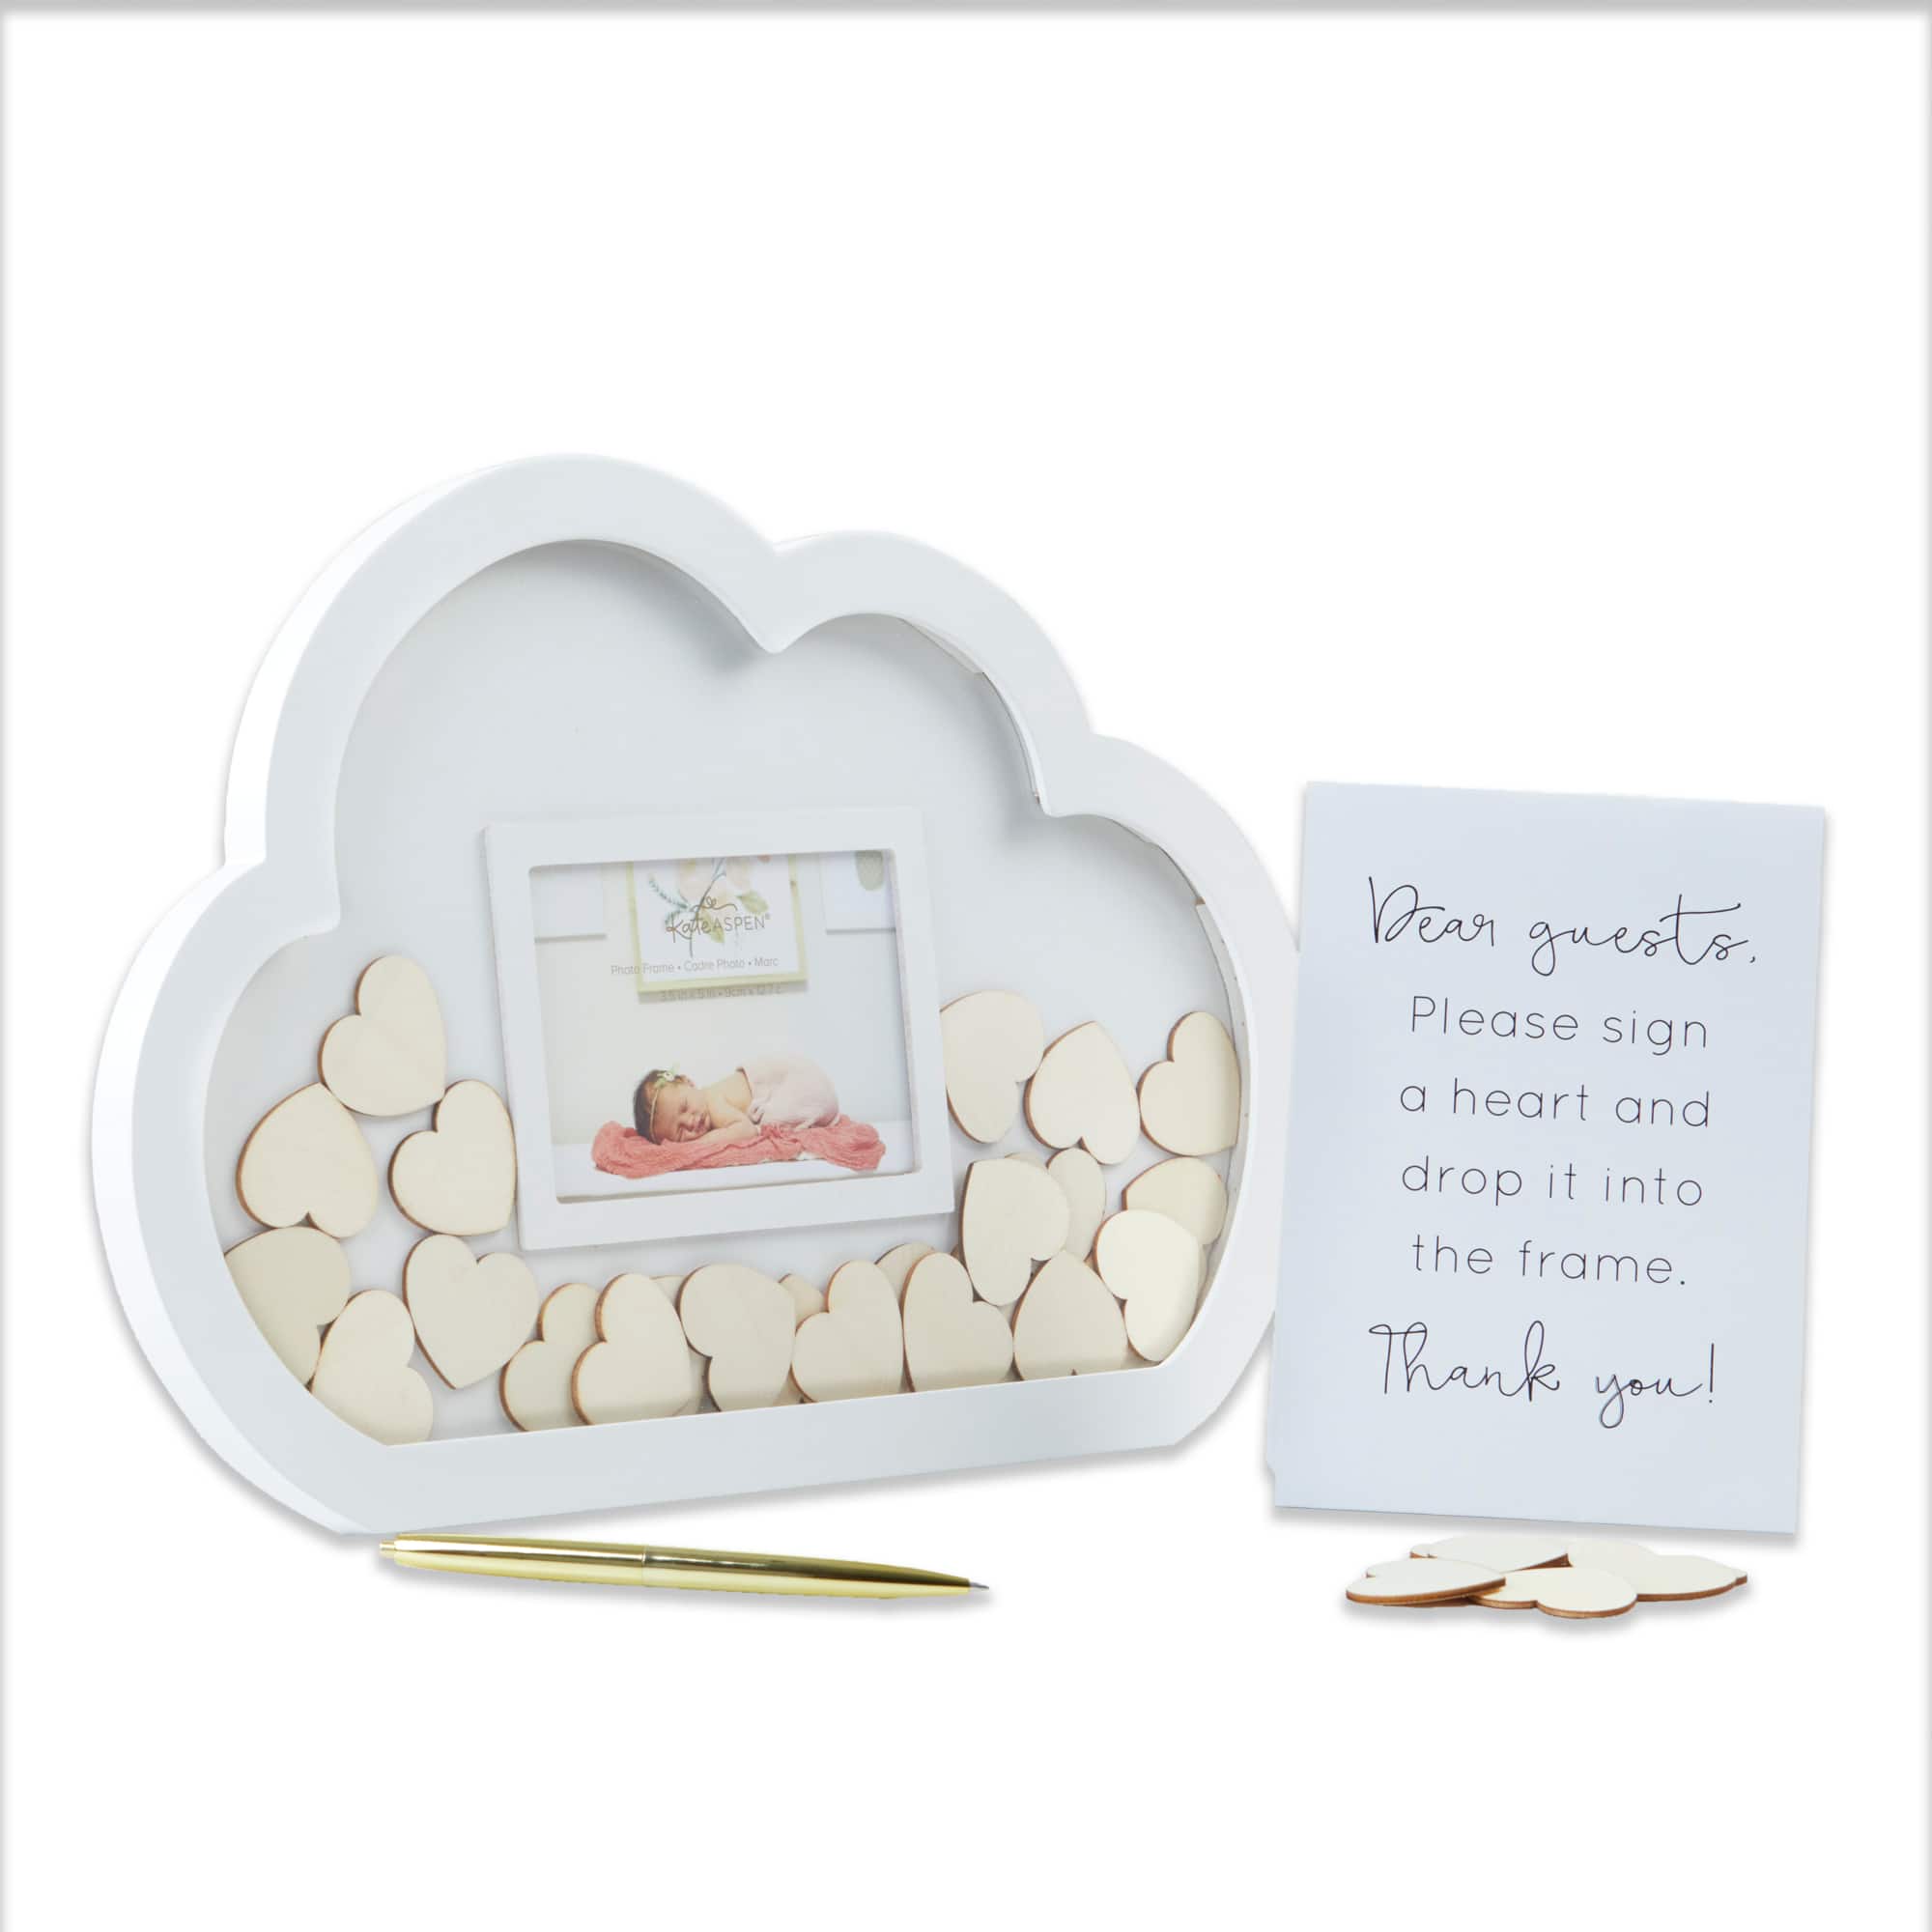 Baby Shower Cloud Frame Guest Book 